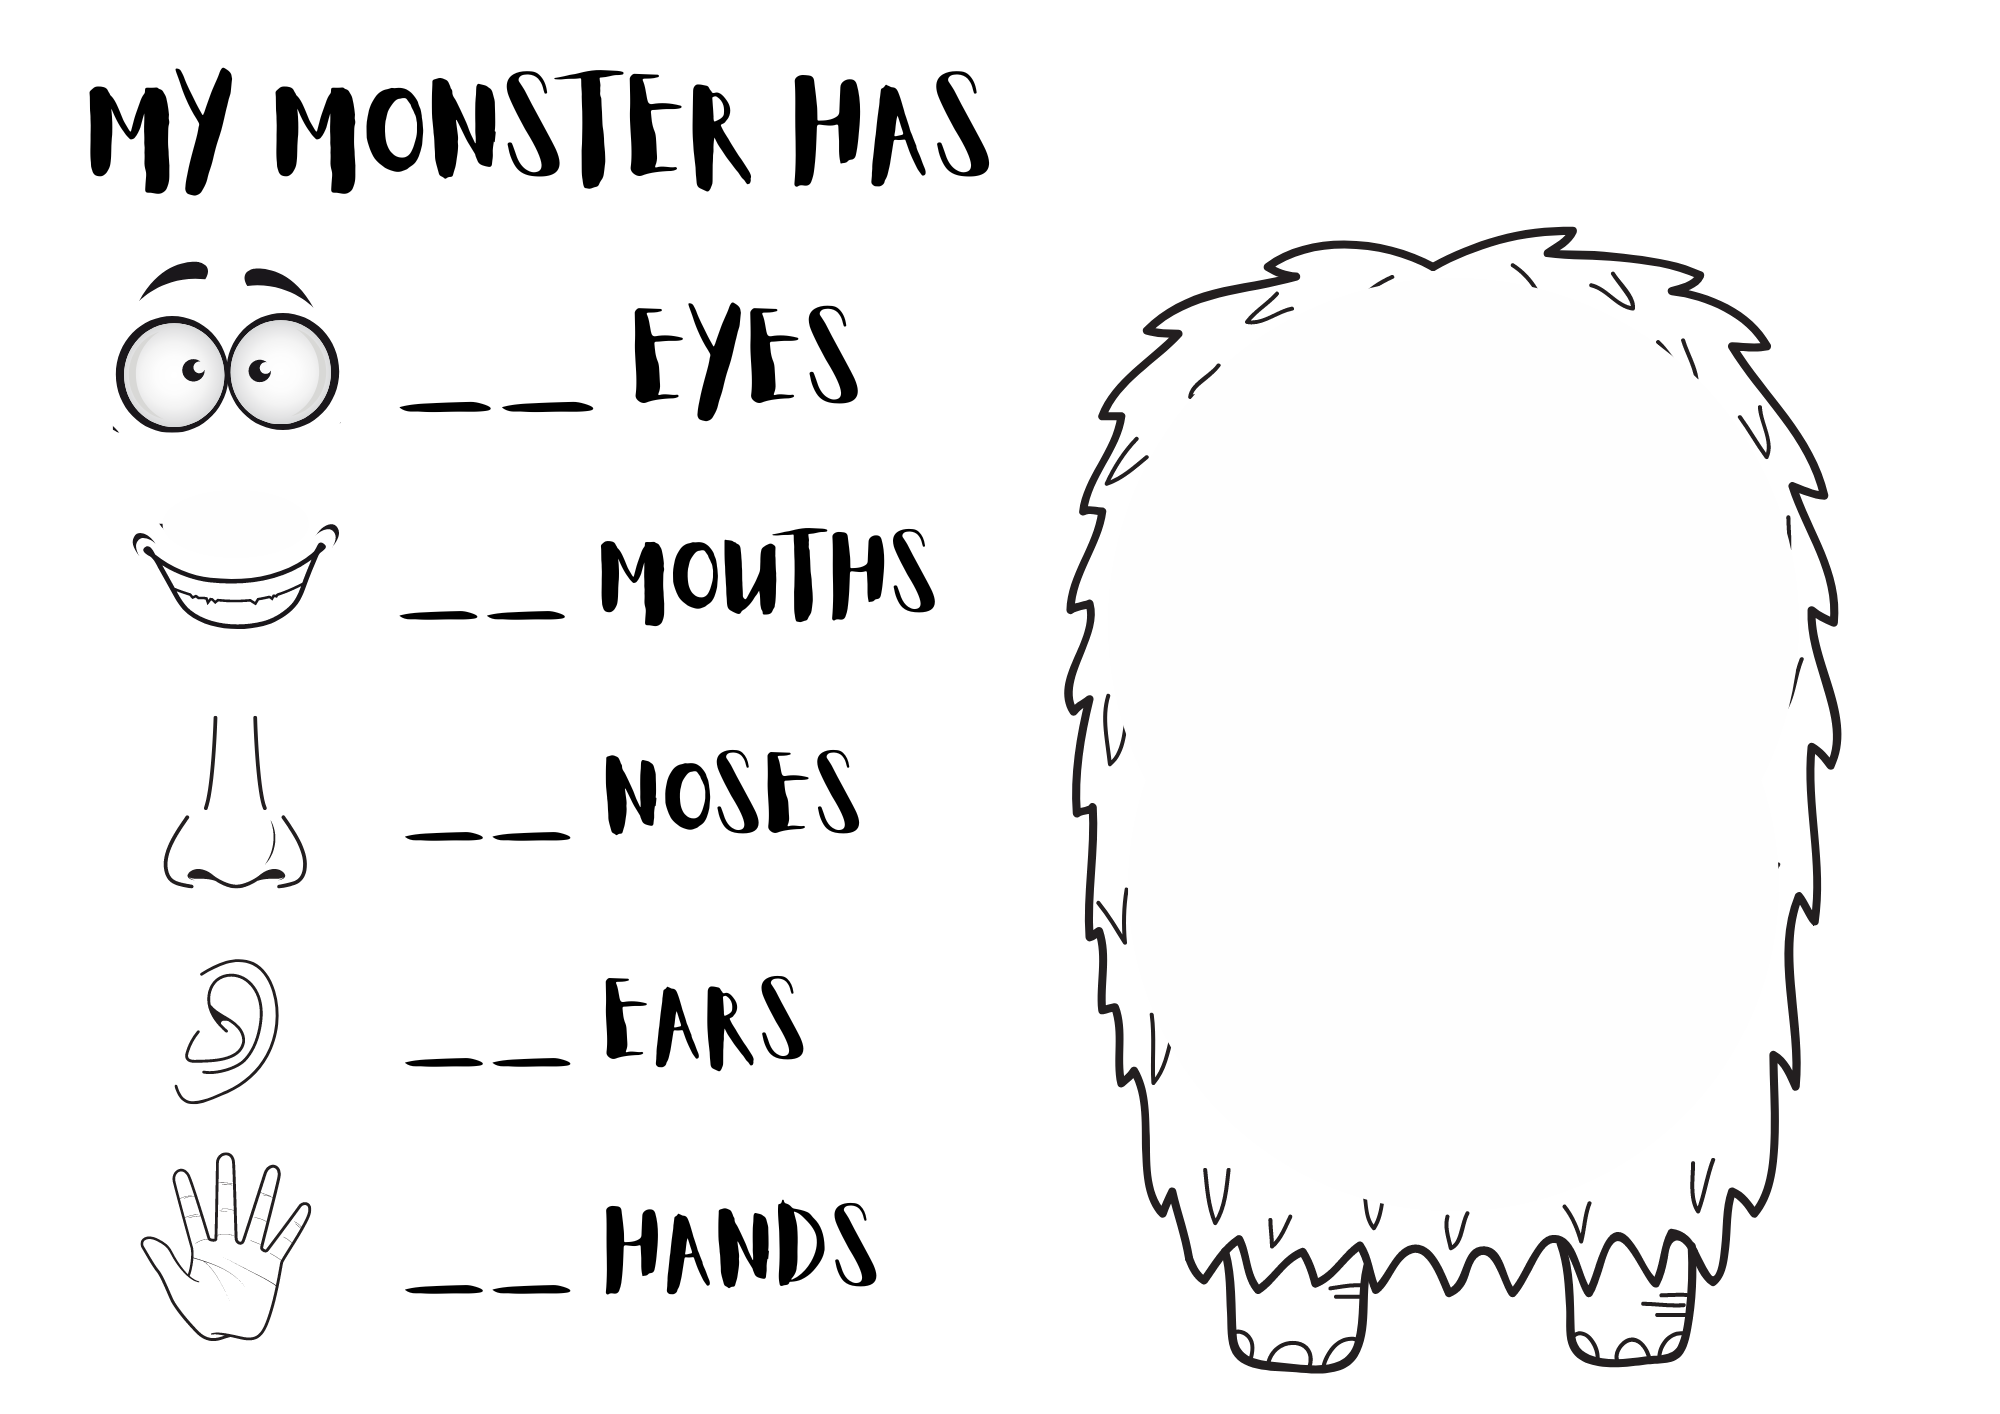 THE MONSTER - BODY PARTS VOCABULARY